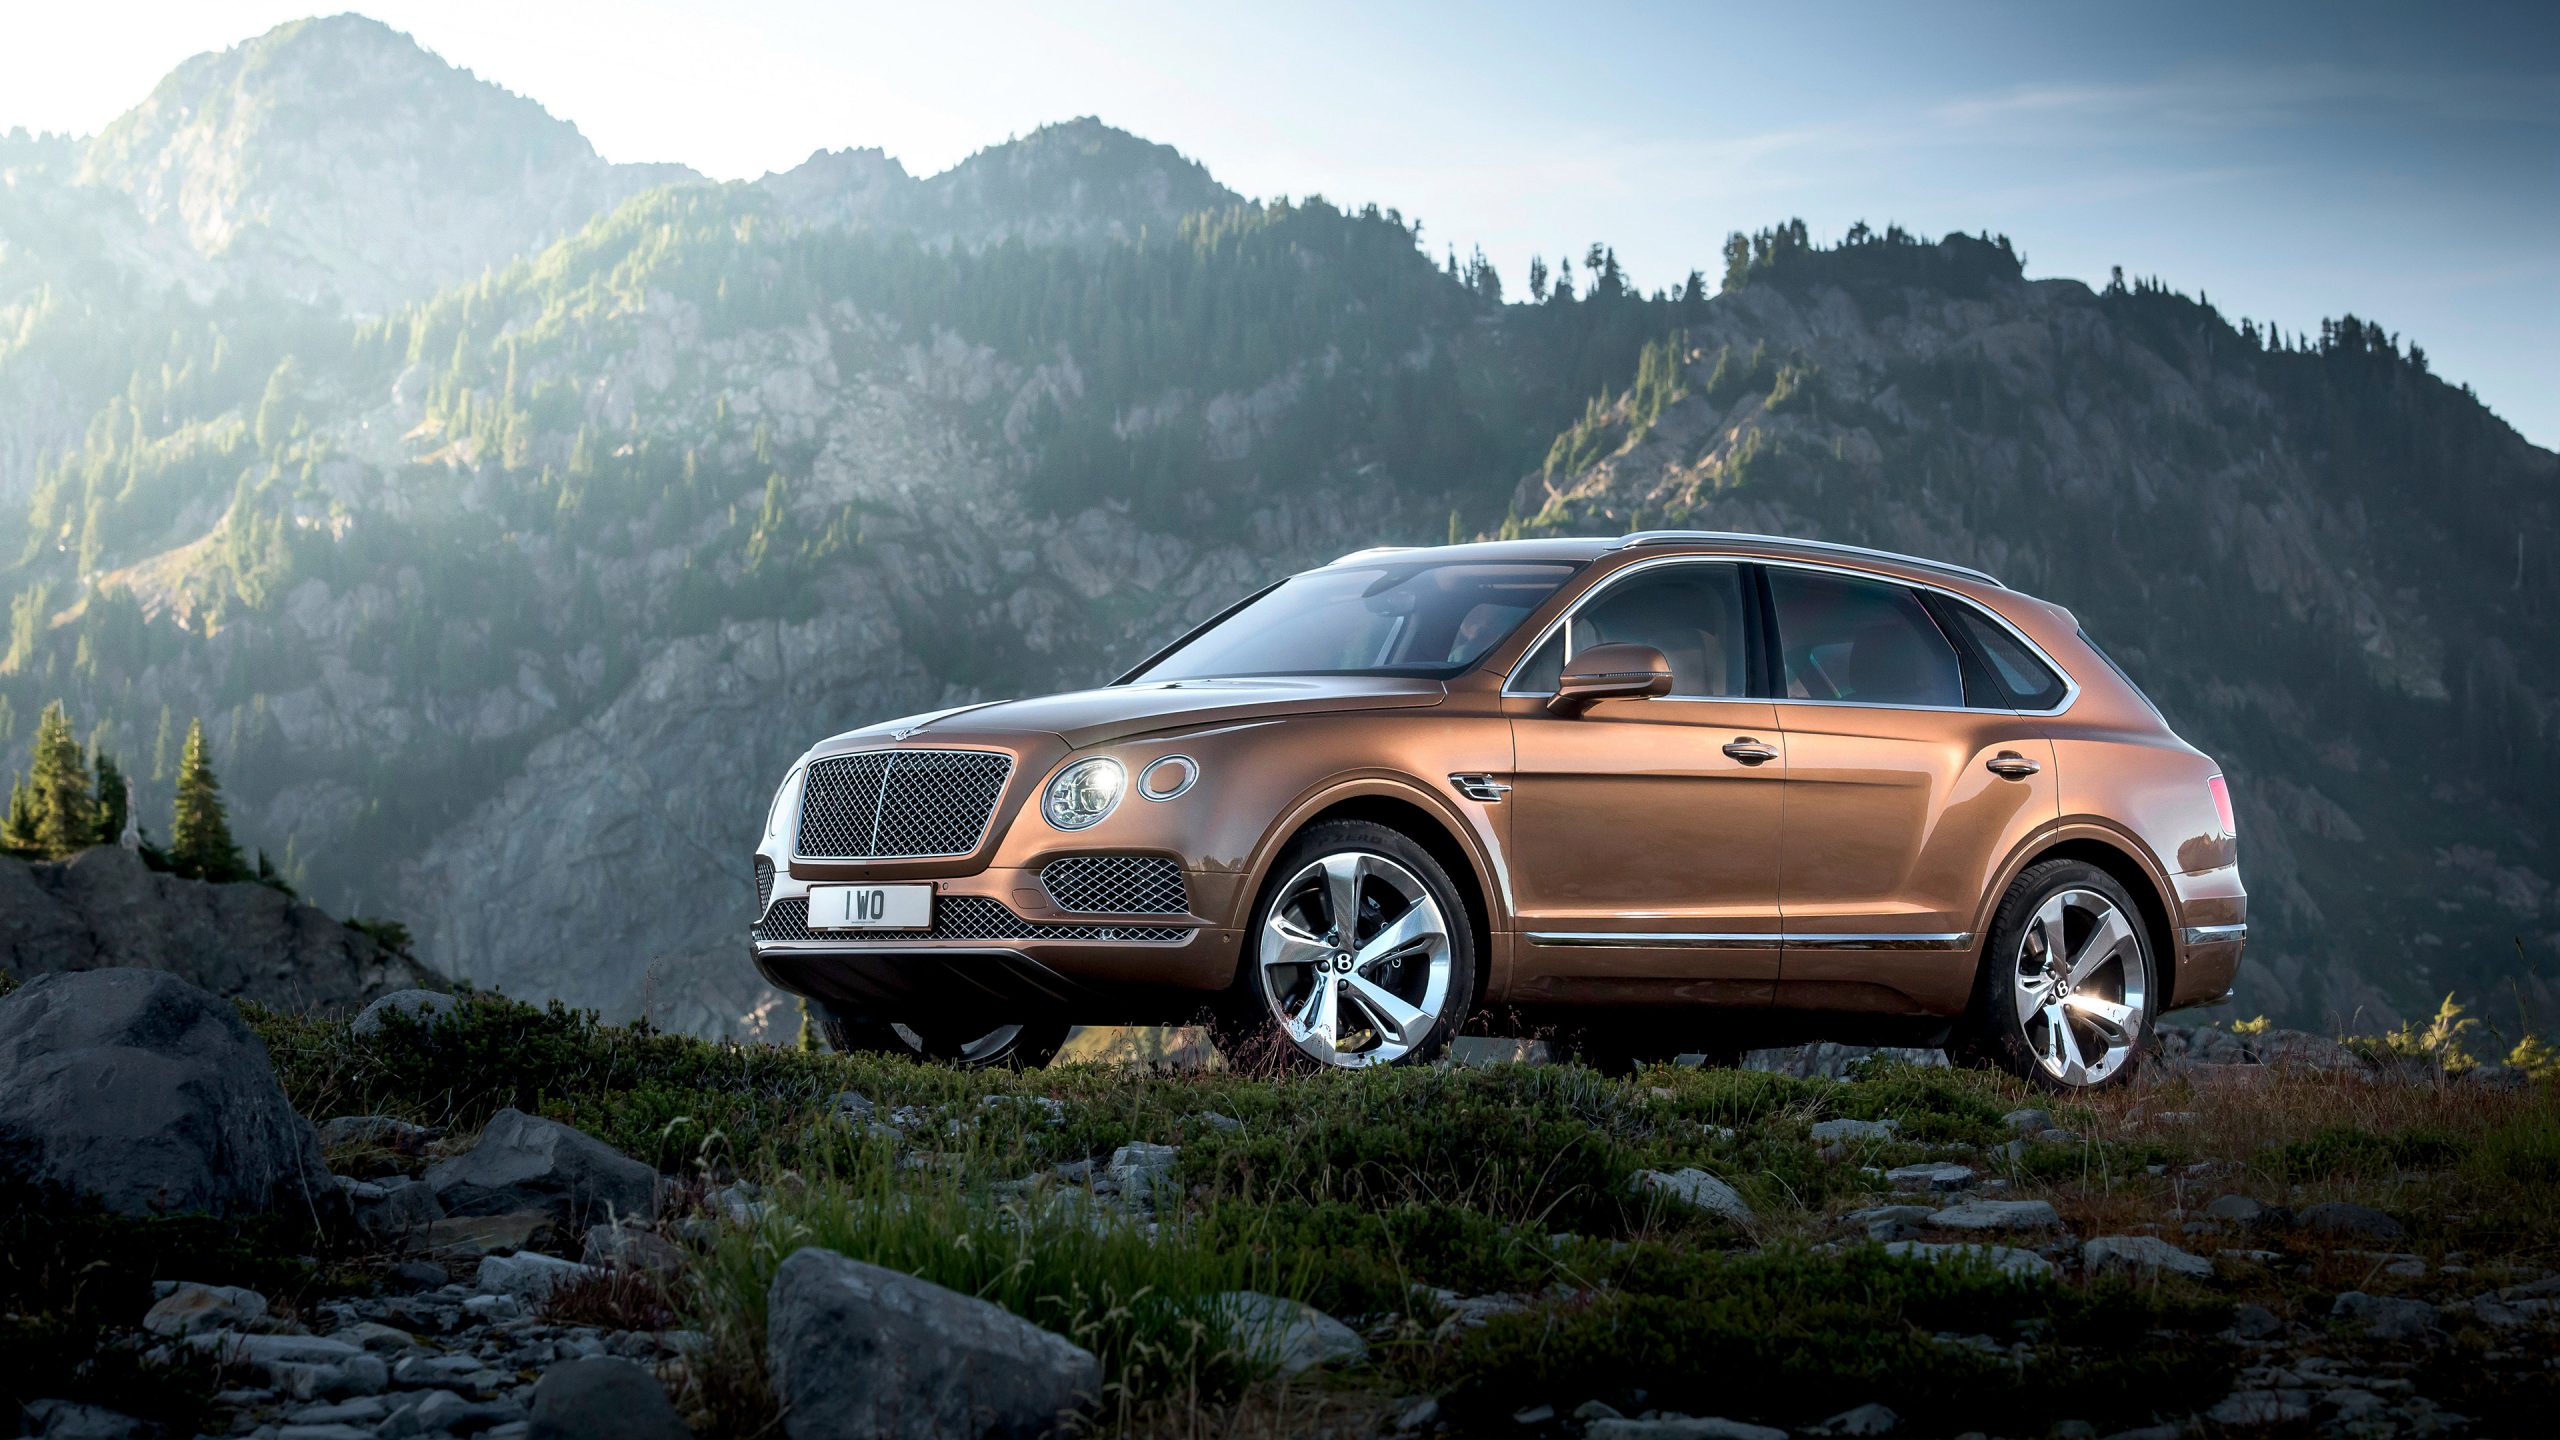 Picture Of A Bentley Truck Wallpapers